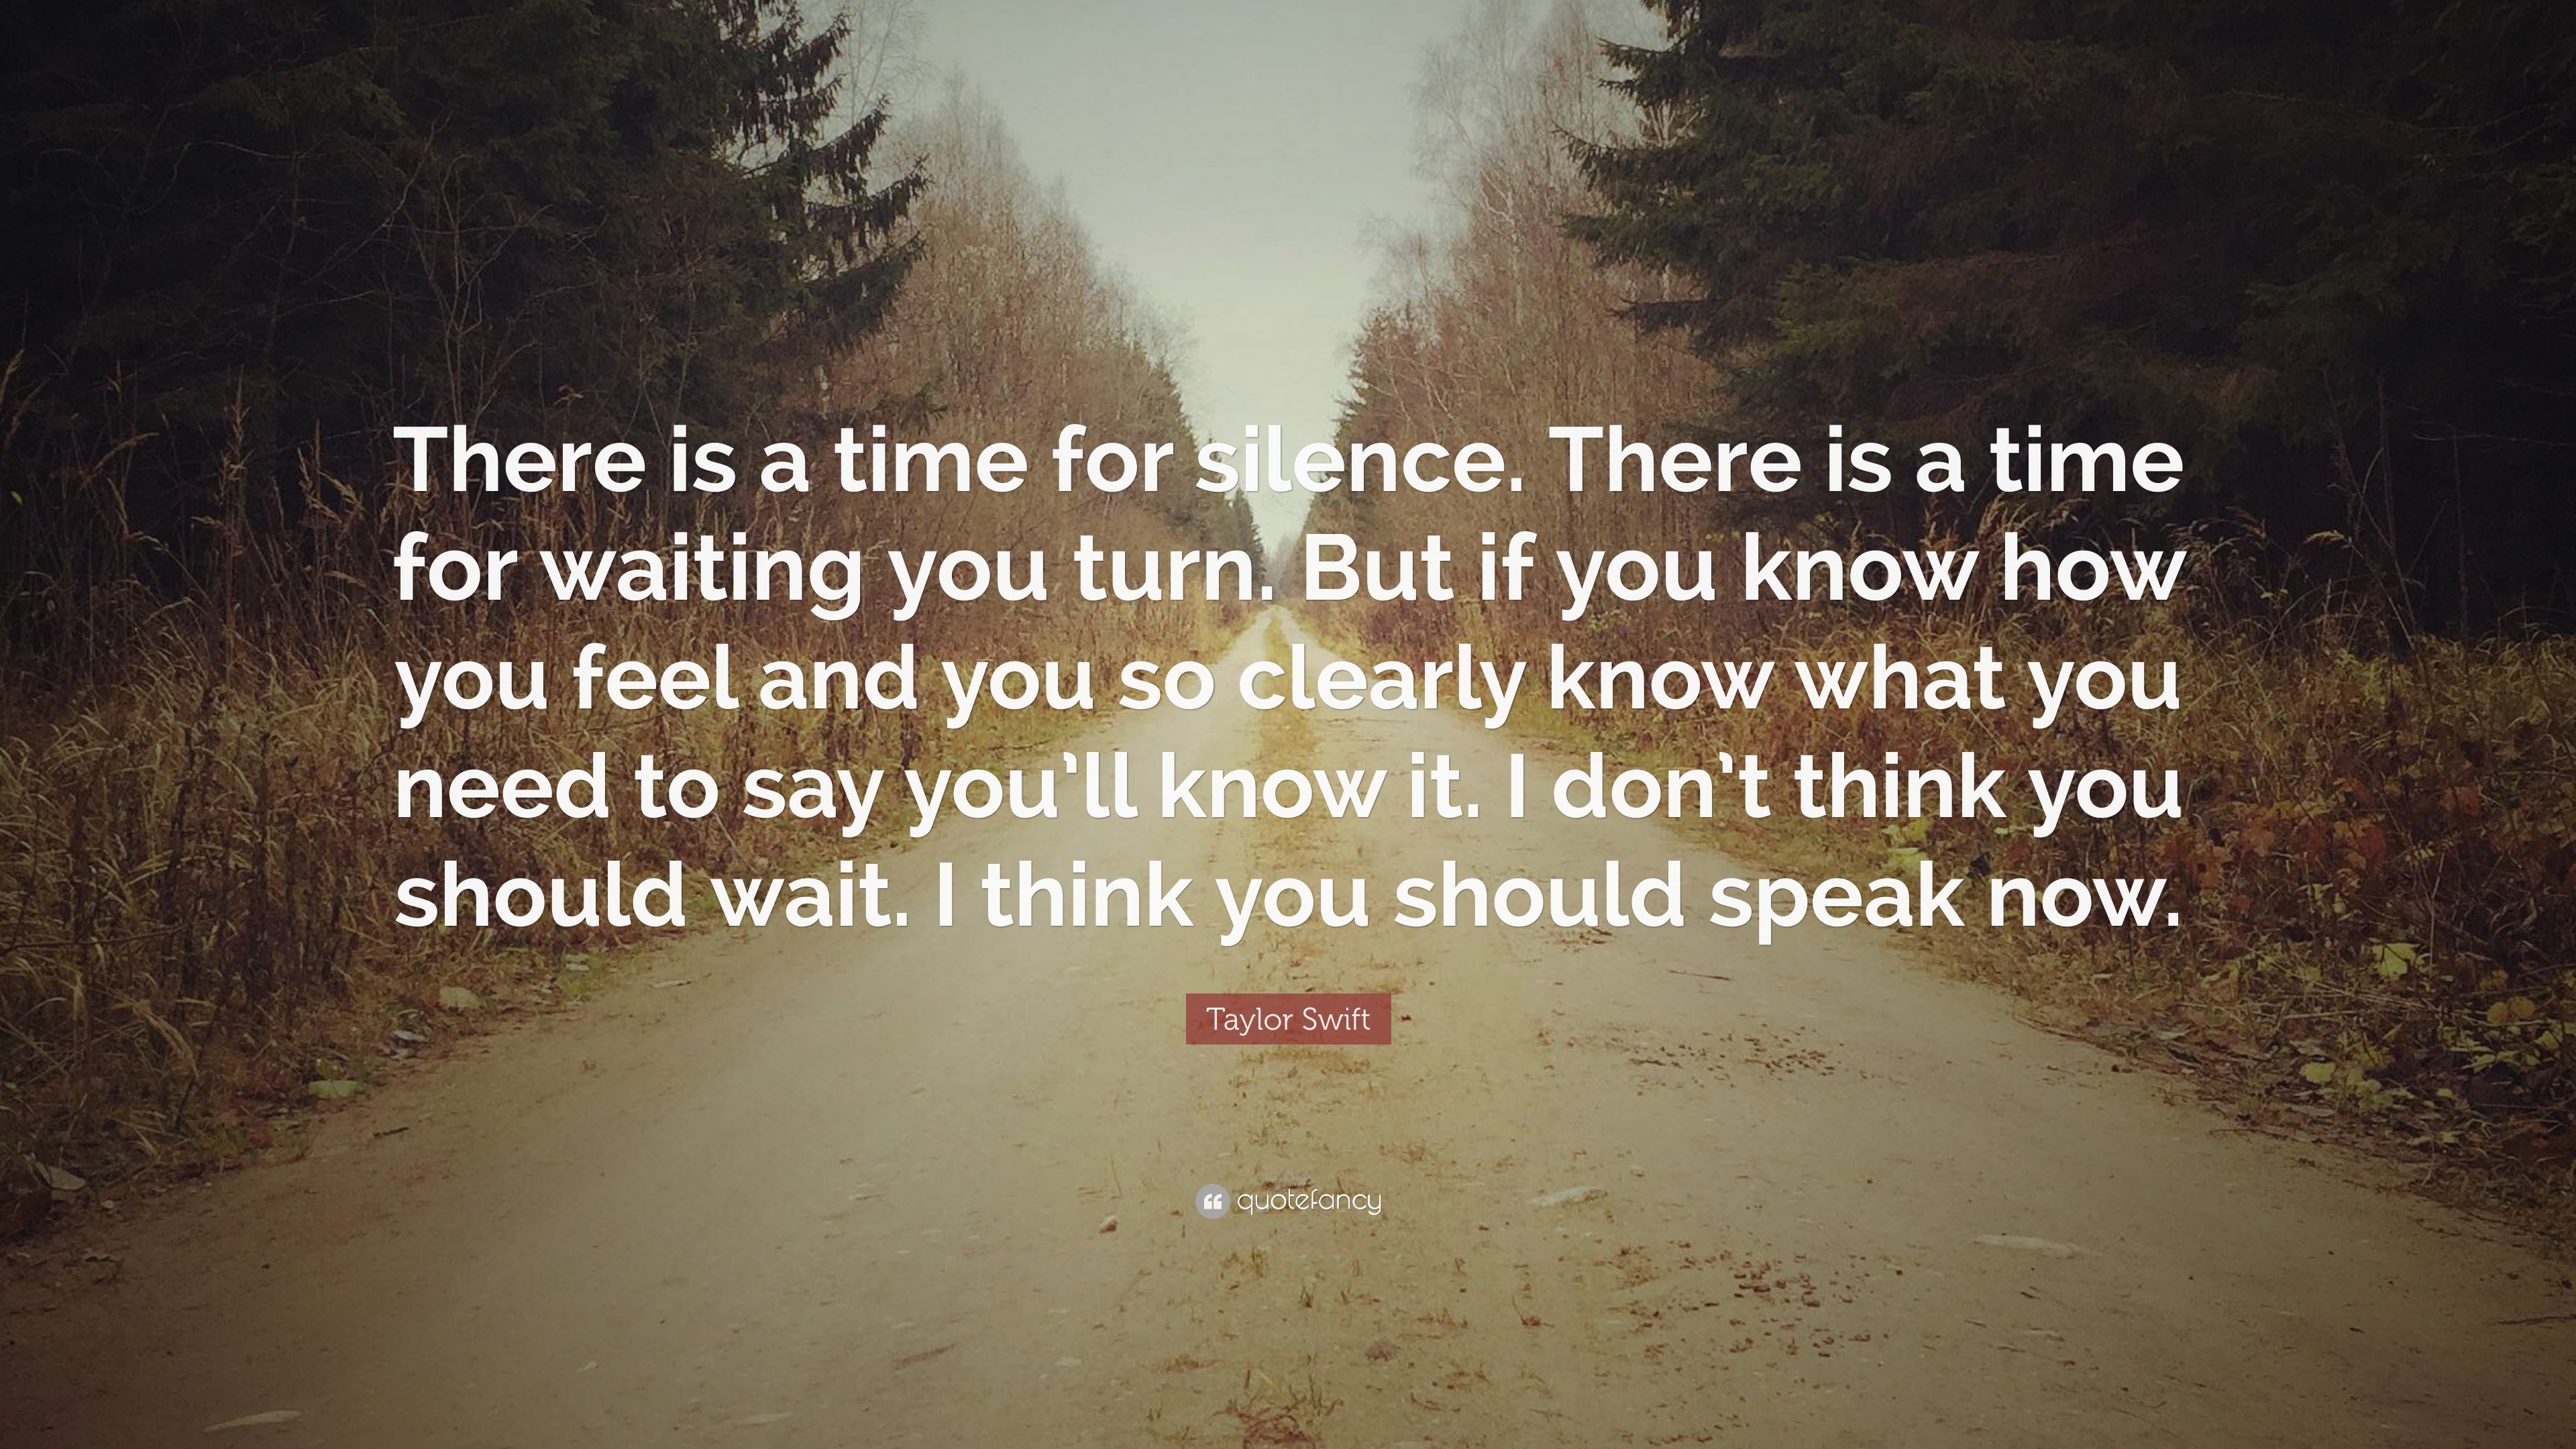 Taylor Swift Quote: “There is a time for silence. There is a time for ...